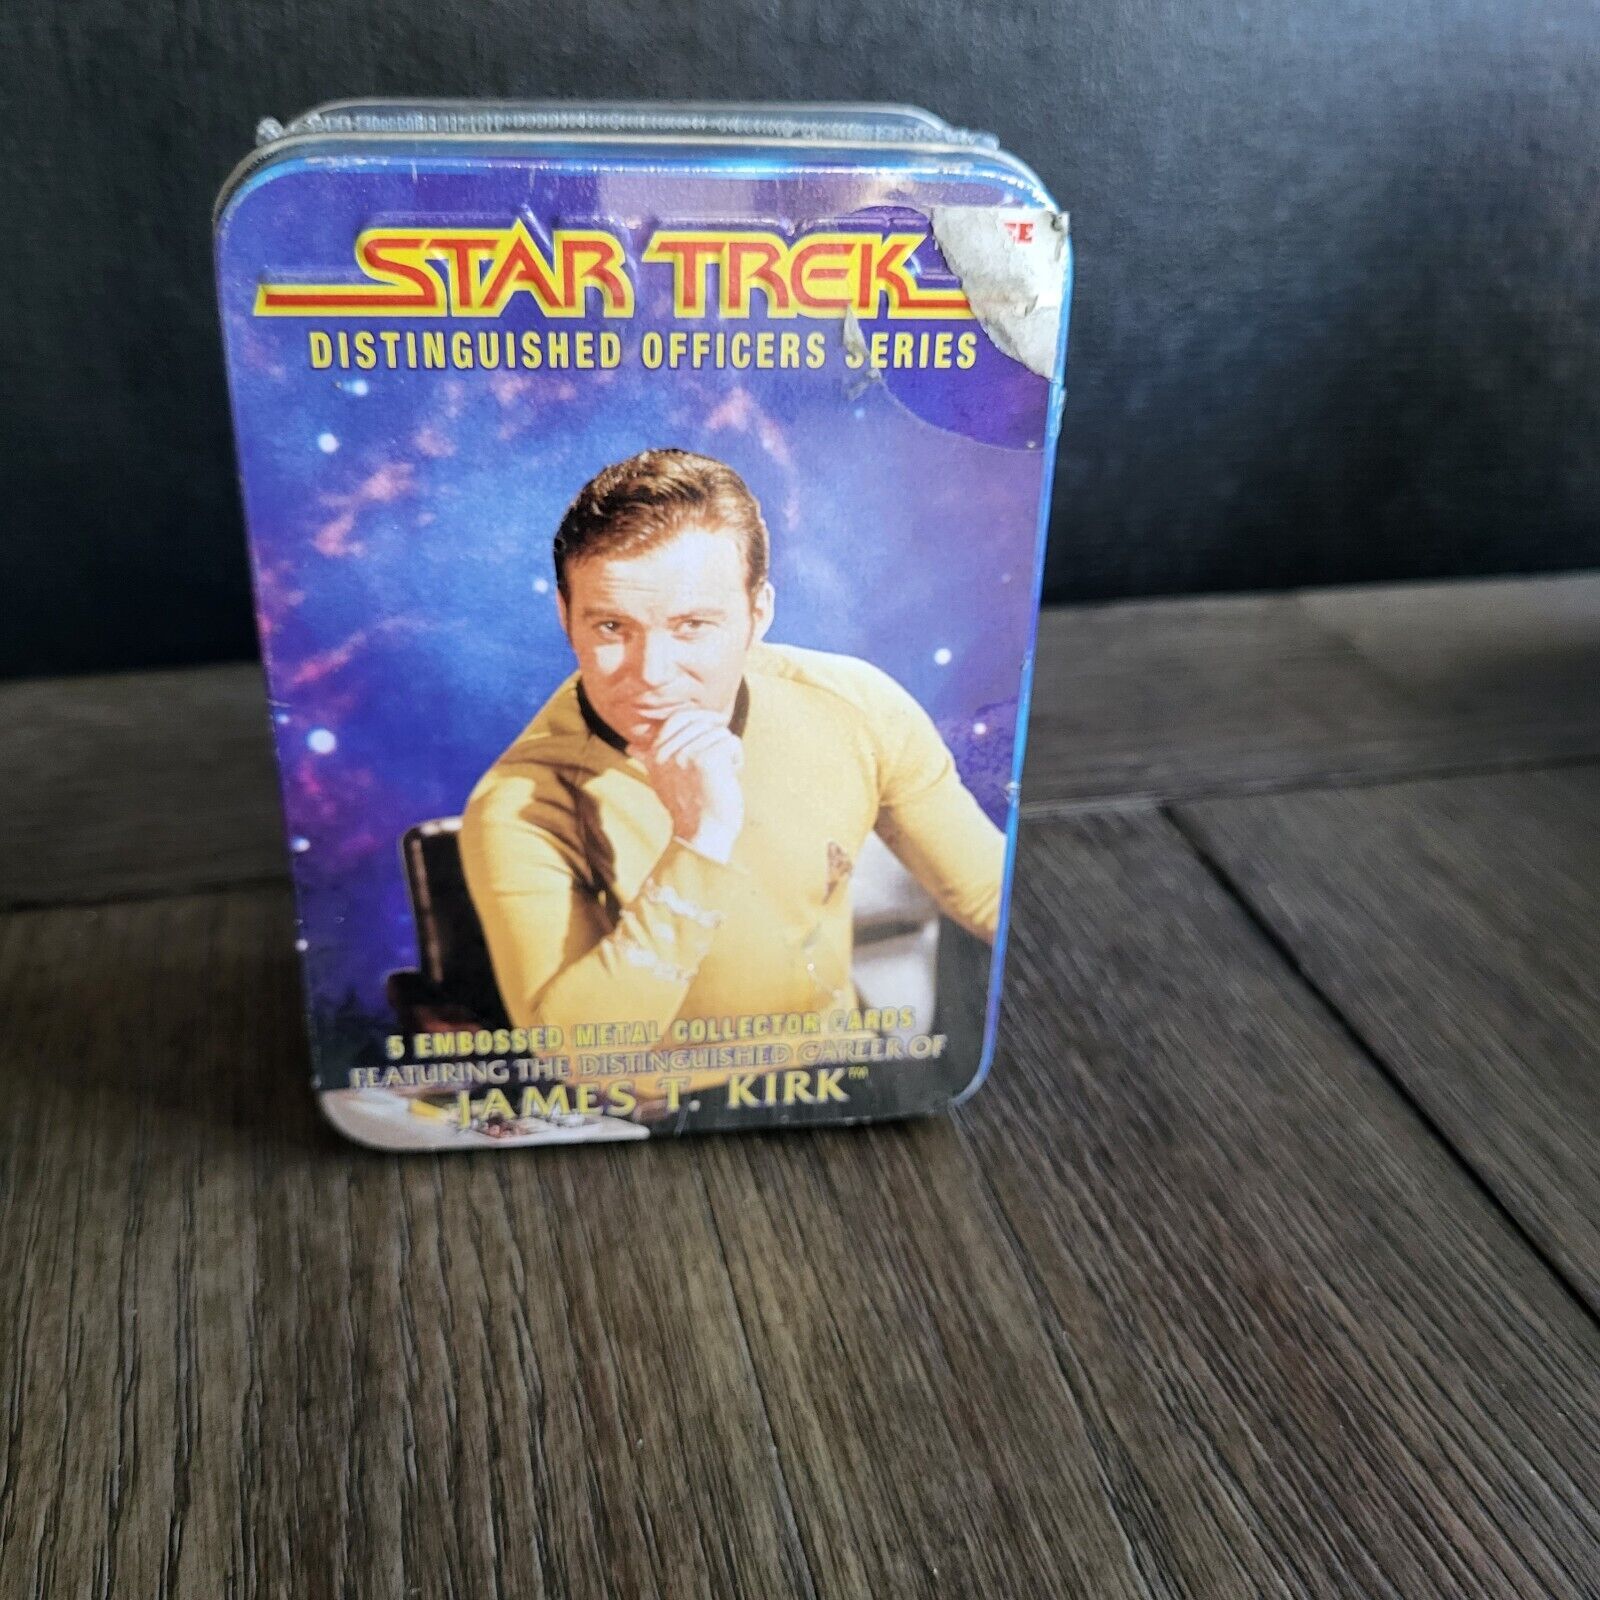 Primary image for Star Trek Distinguished Officers Series Metal Collector Cards New Factory Sealed